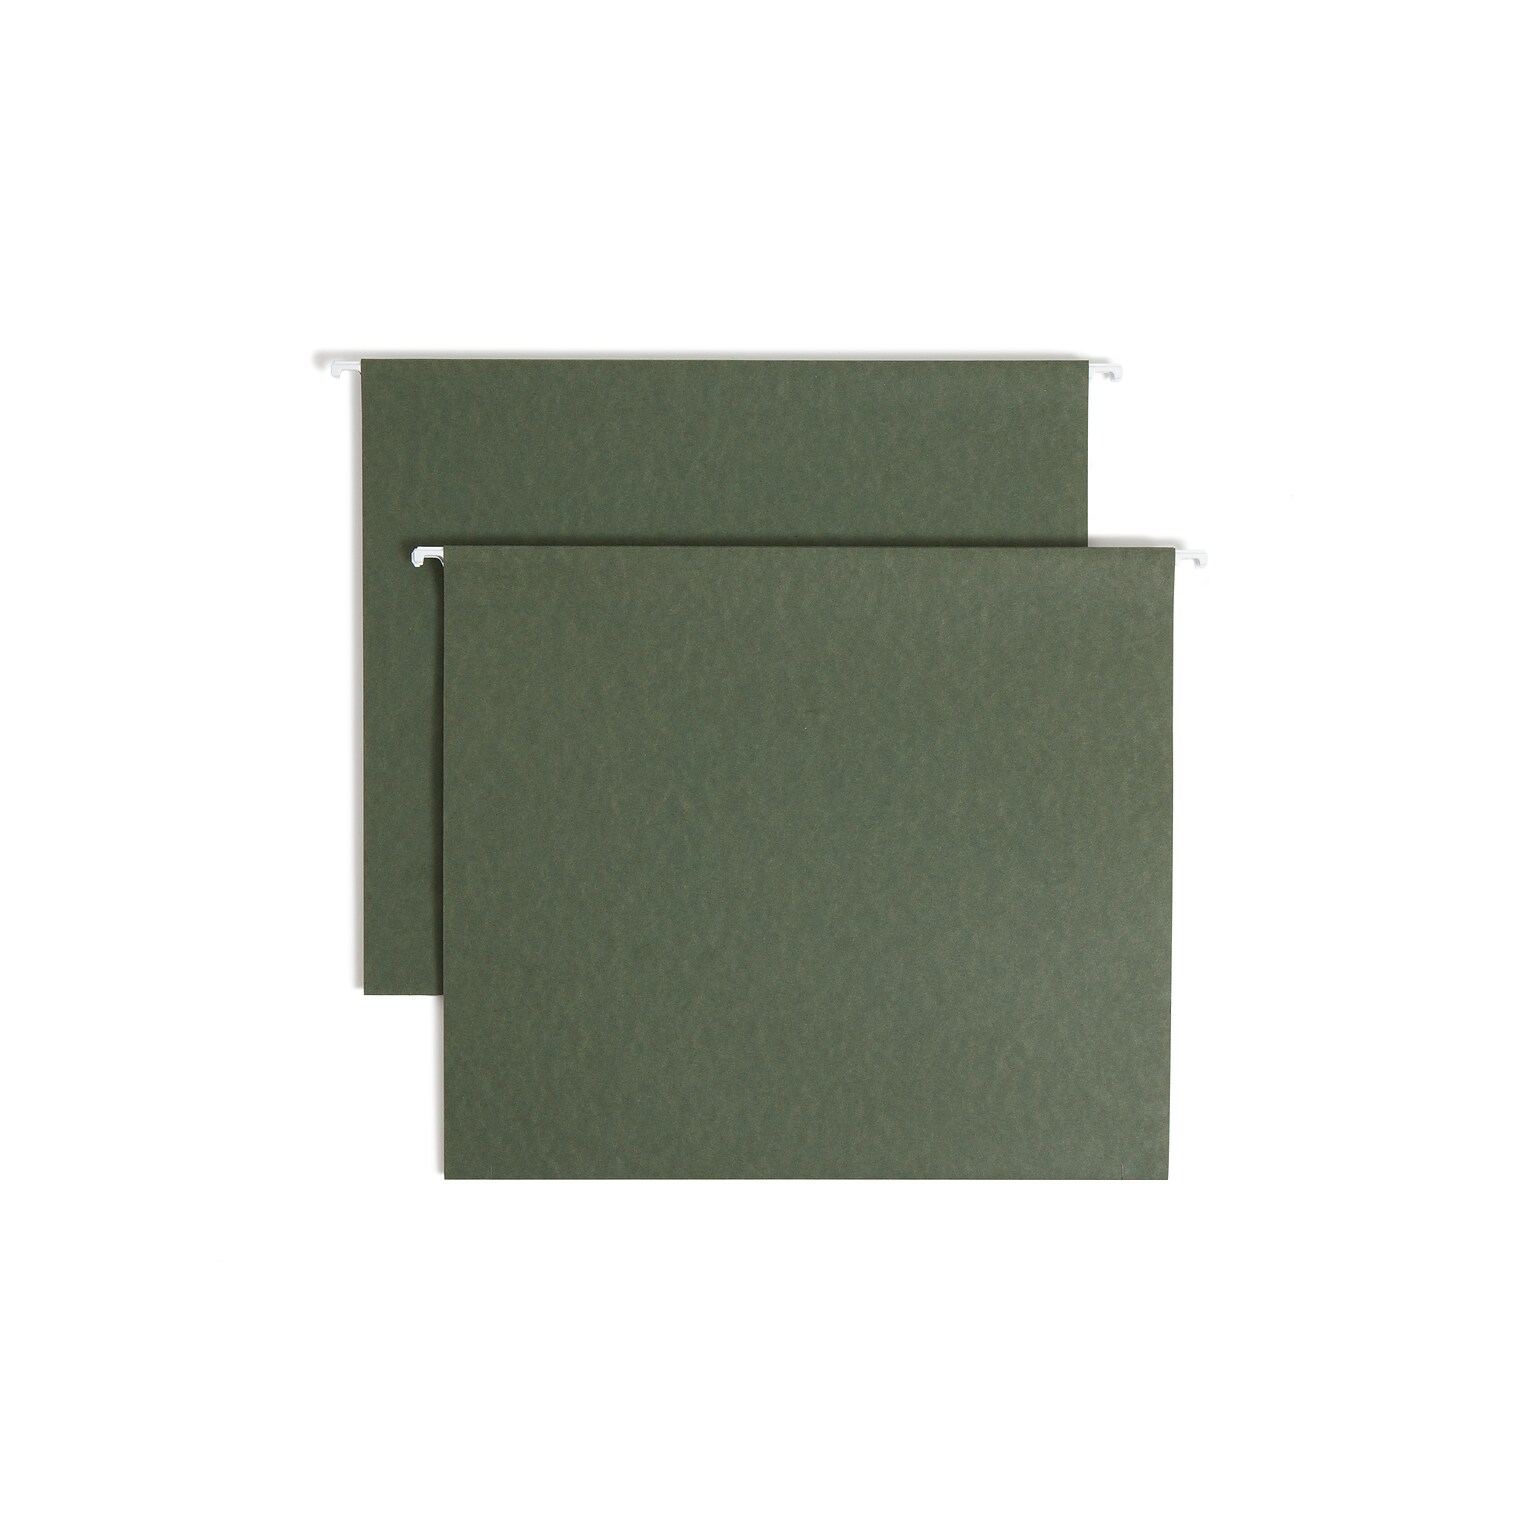 Smead Hanging File Folders with Box Bottom, 2 Expansion, Letter Size, Standard Green, 25/Box (64259)